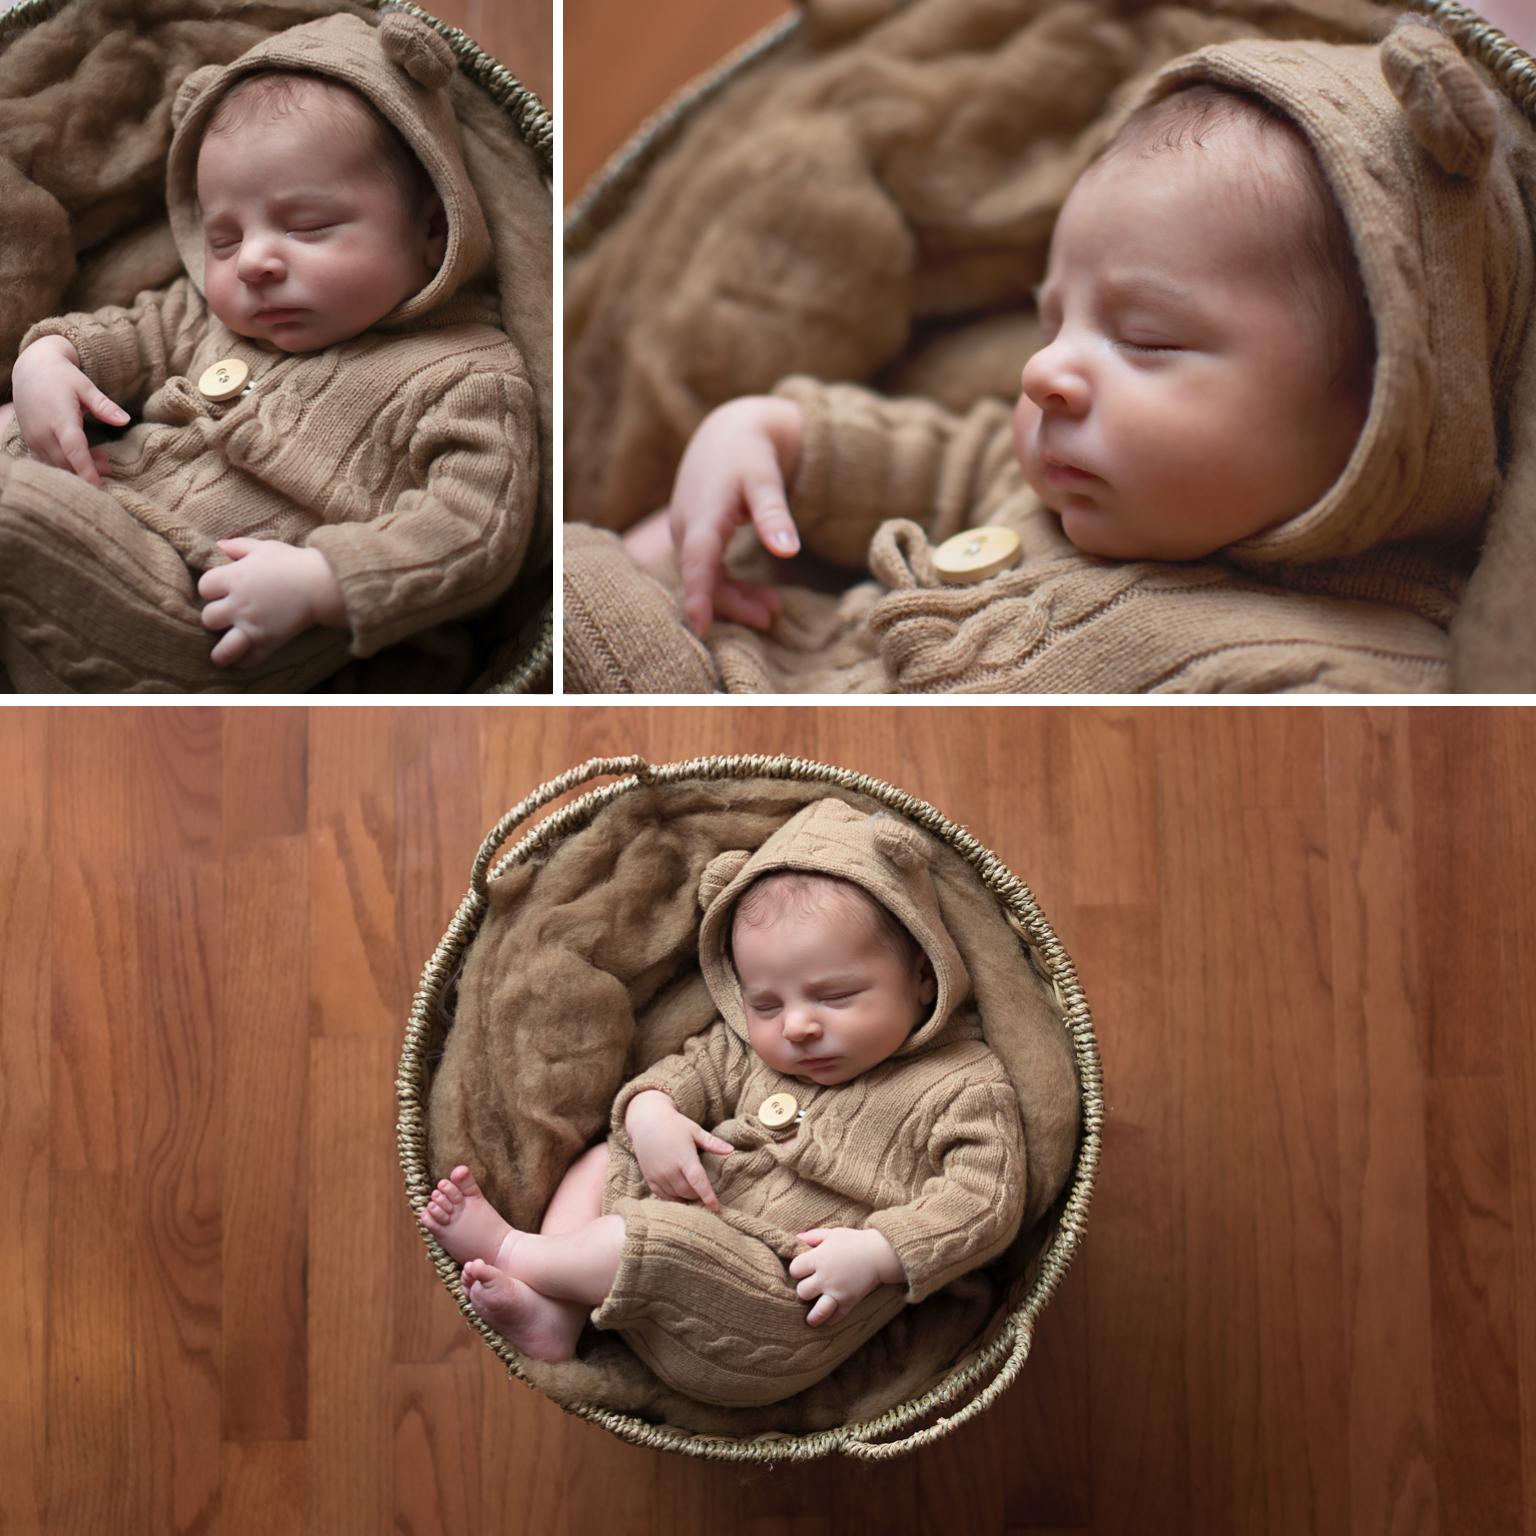 Baby Elijah Williamsport pa newborn photographer in home newborn session baby boy neutral colors bear connet baby in basket newborn outfit